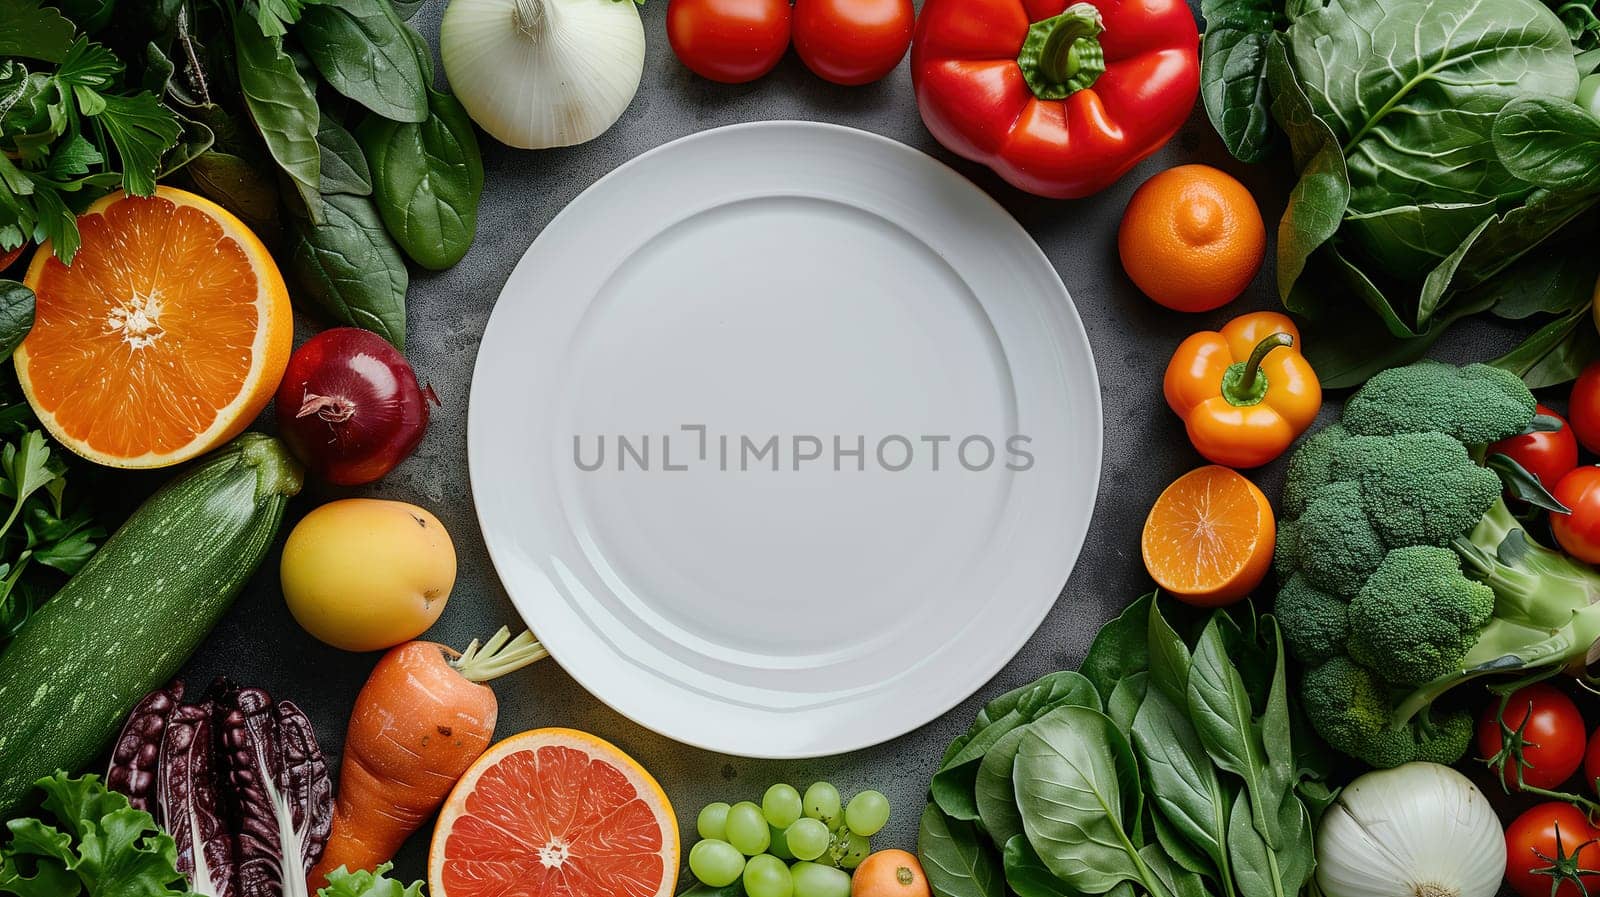 A variety of fruits and vegetables such as apples, oranges, bananas, carrots, tomatoes, and bell peppers arranged around a white plate. The colorful assortment creates a vibrant and healthy display.